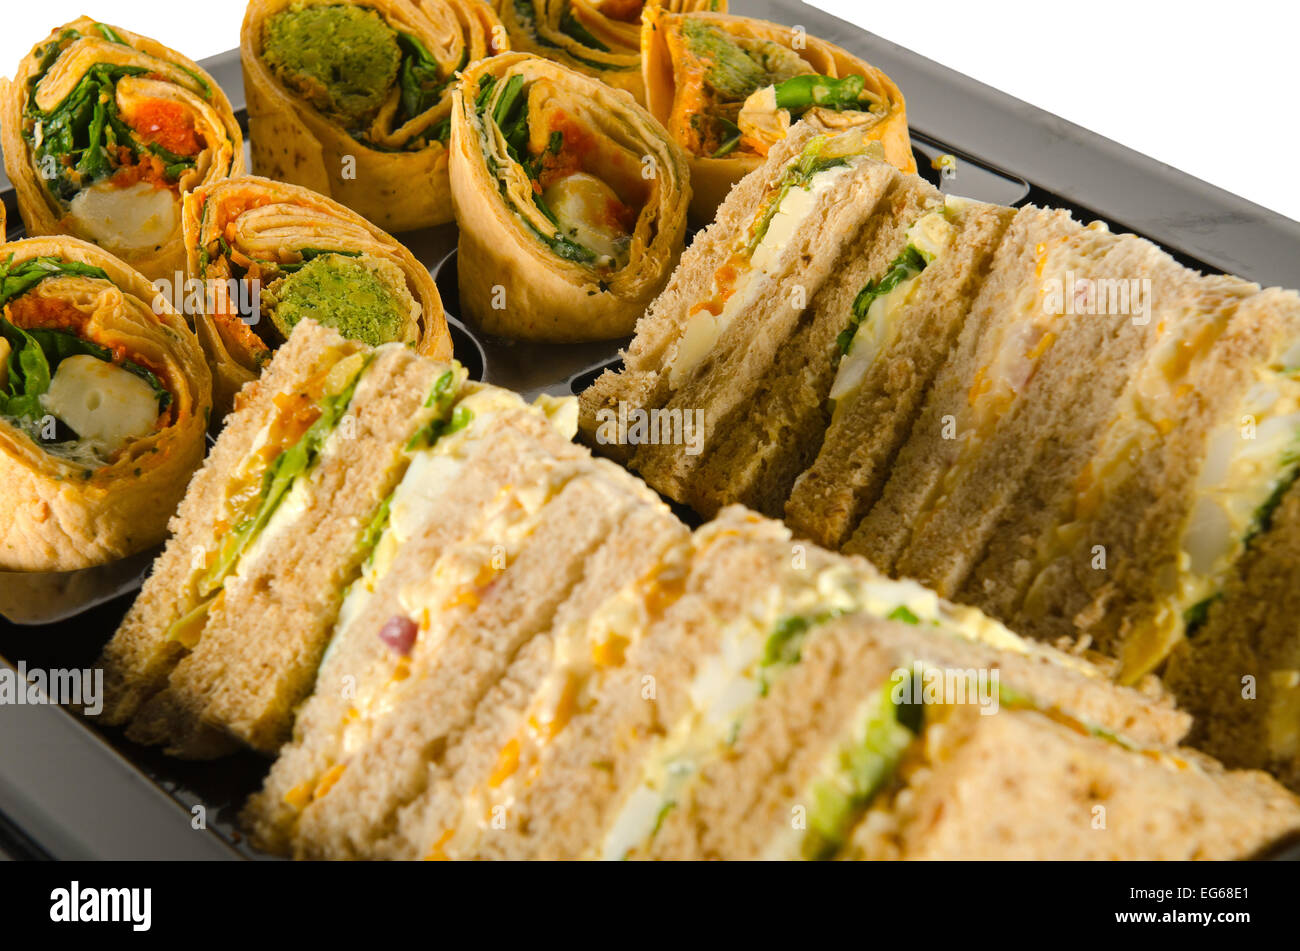 a plate of party food, wraps rolls and sandwiches Stock Photo